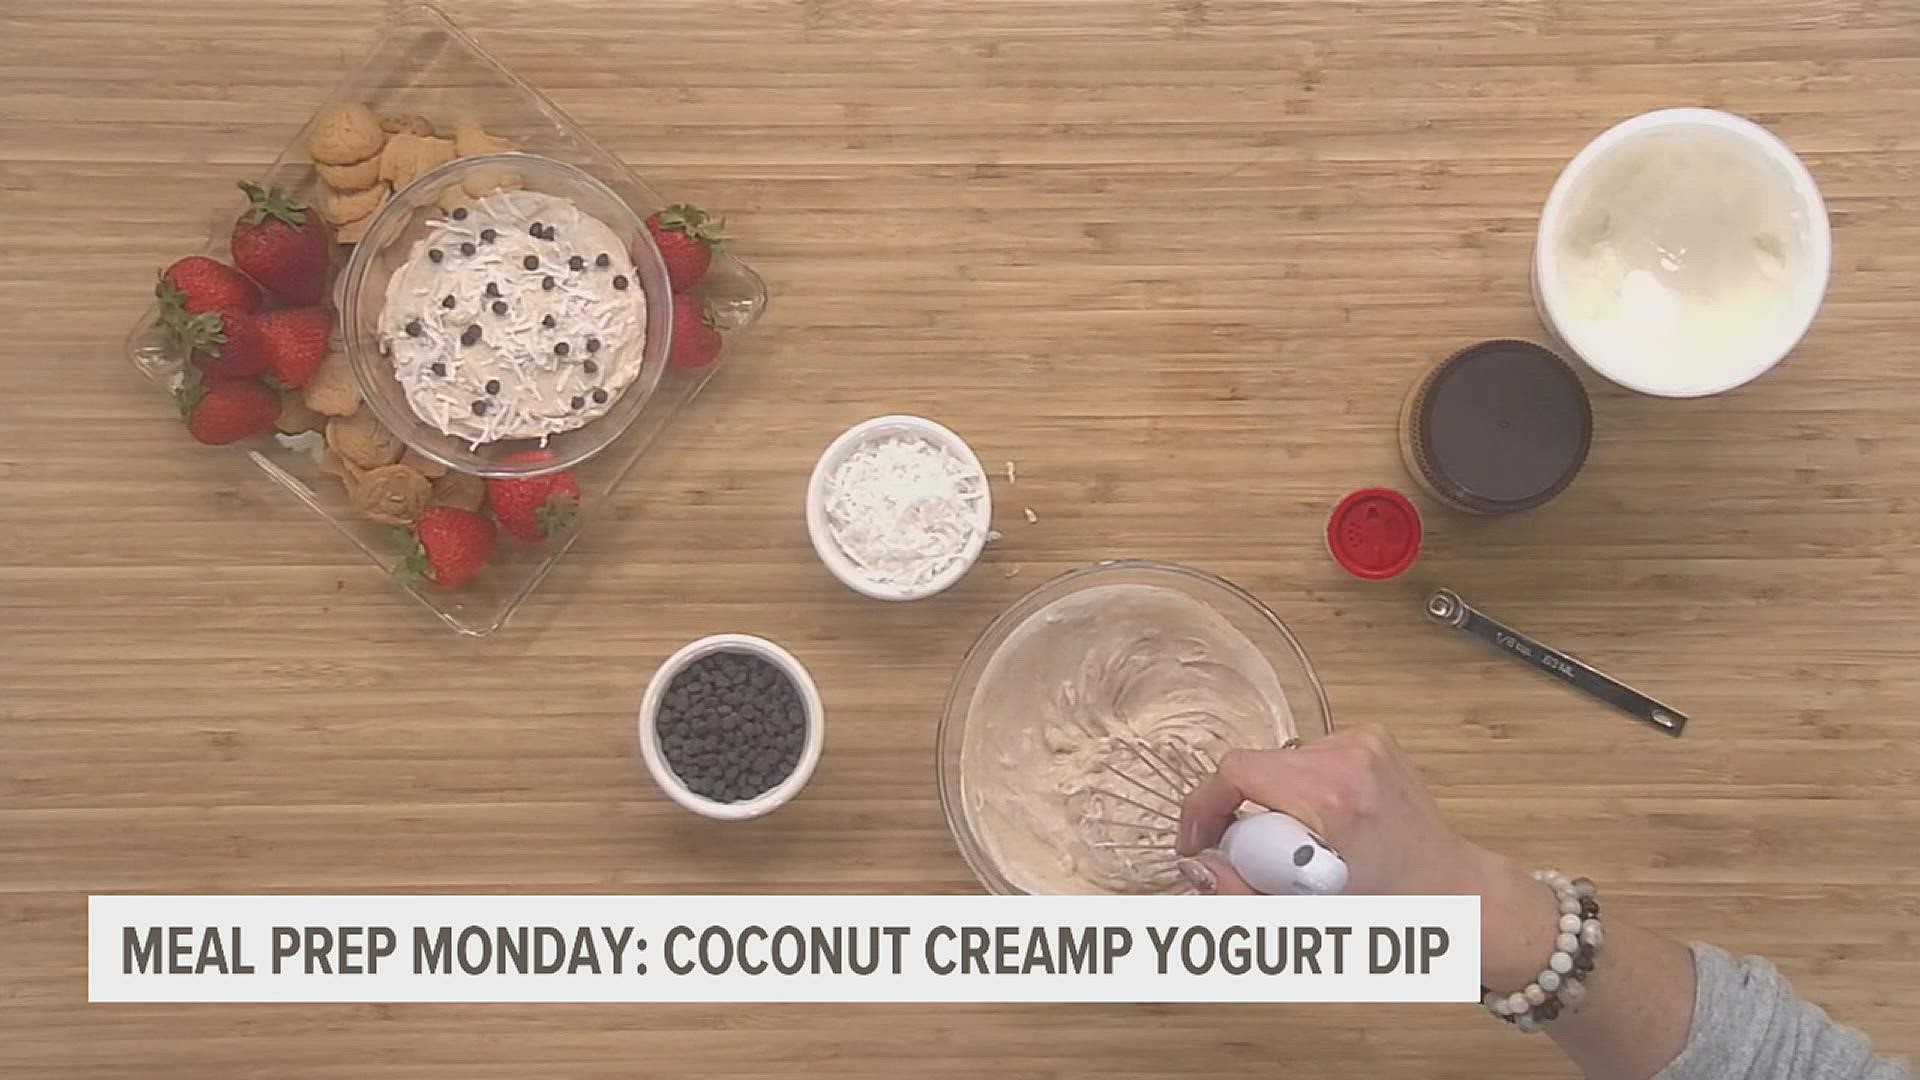 This sweetened-up coconut yogurt dip makes for a great snack or a healthier dessert option.